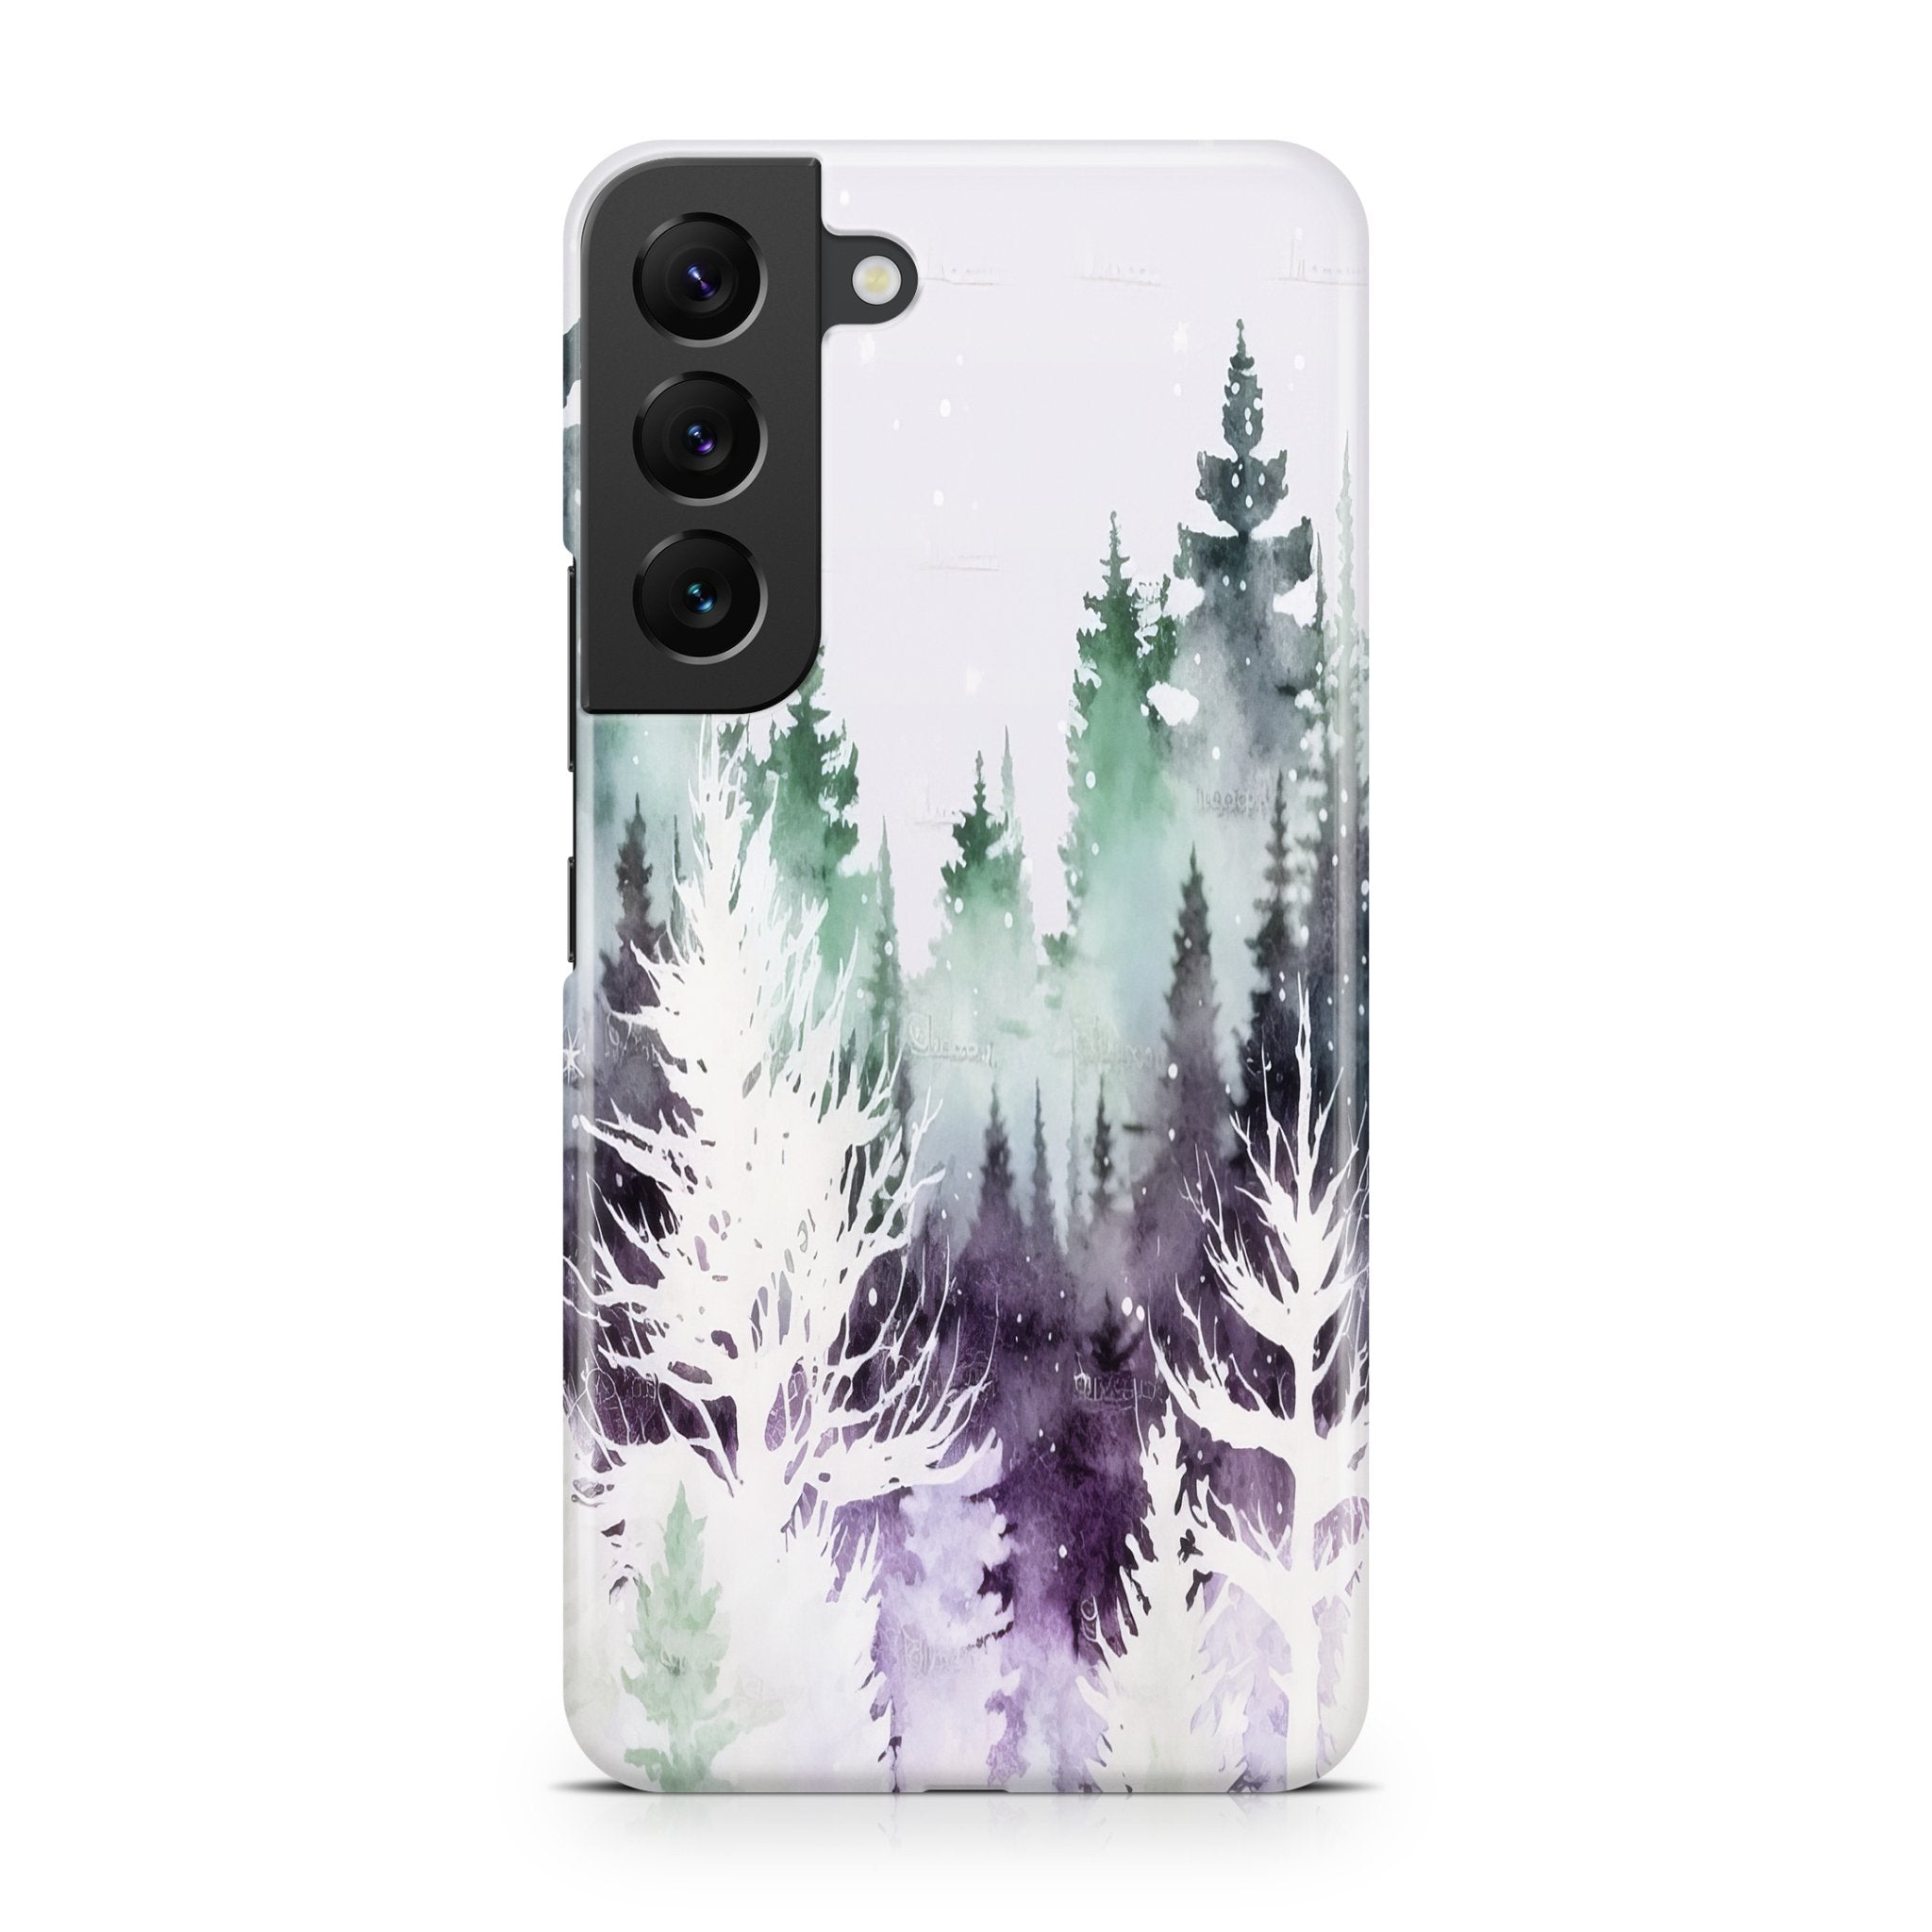 Winter Pines - Samsung phone case designs by CaseSwagger